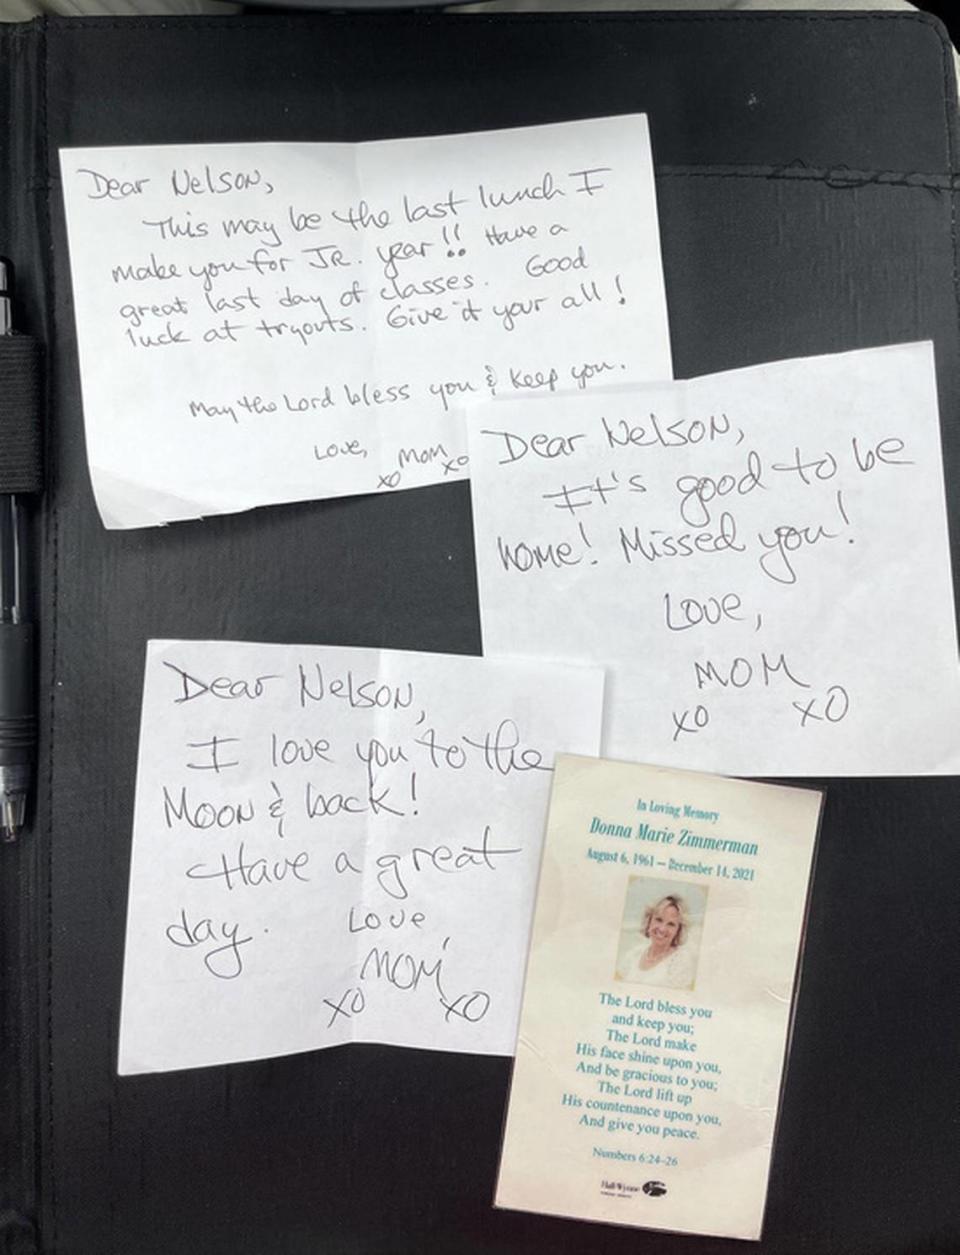 Nelson Zimmerman keeps hundreds of his mother’s notes of encouragement in a wooden box by his bedside, and he reads one each morning, along with a folder he carries containing the most special ones.